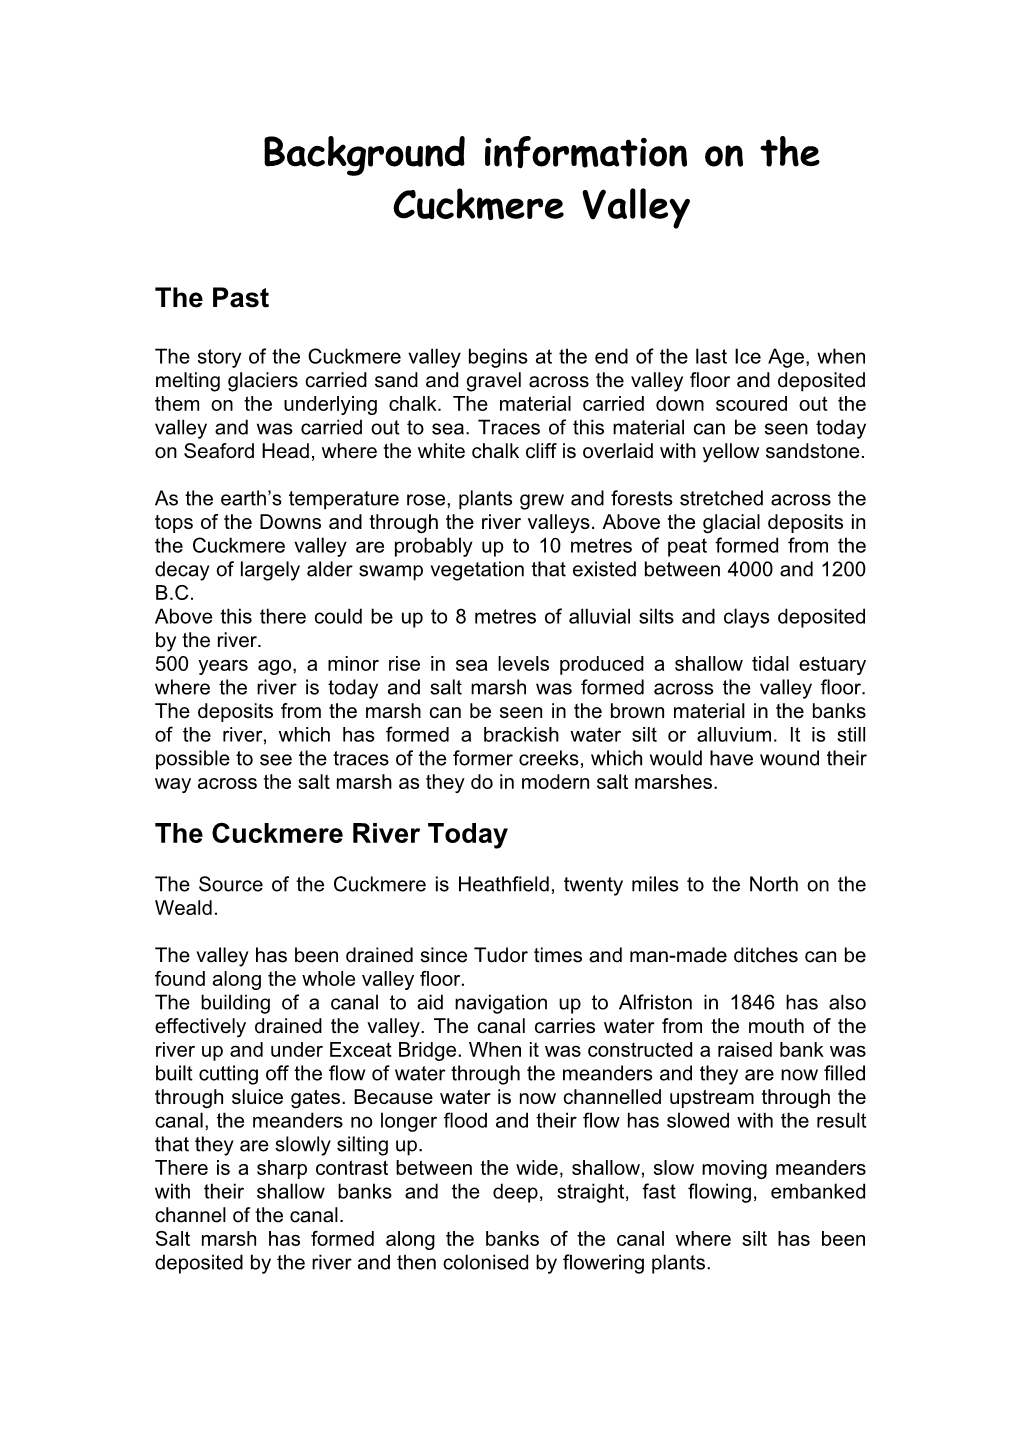 Background Information on the Cuckmere Valley